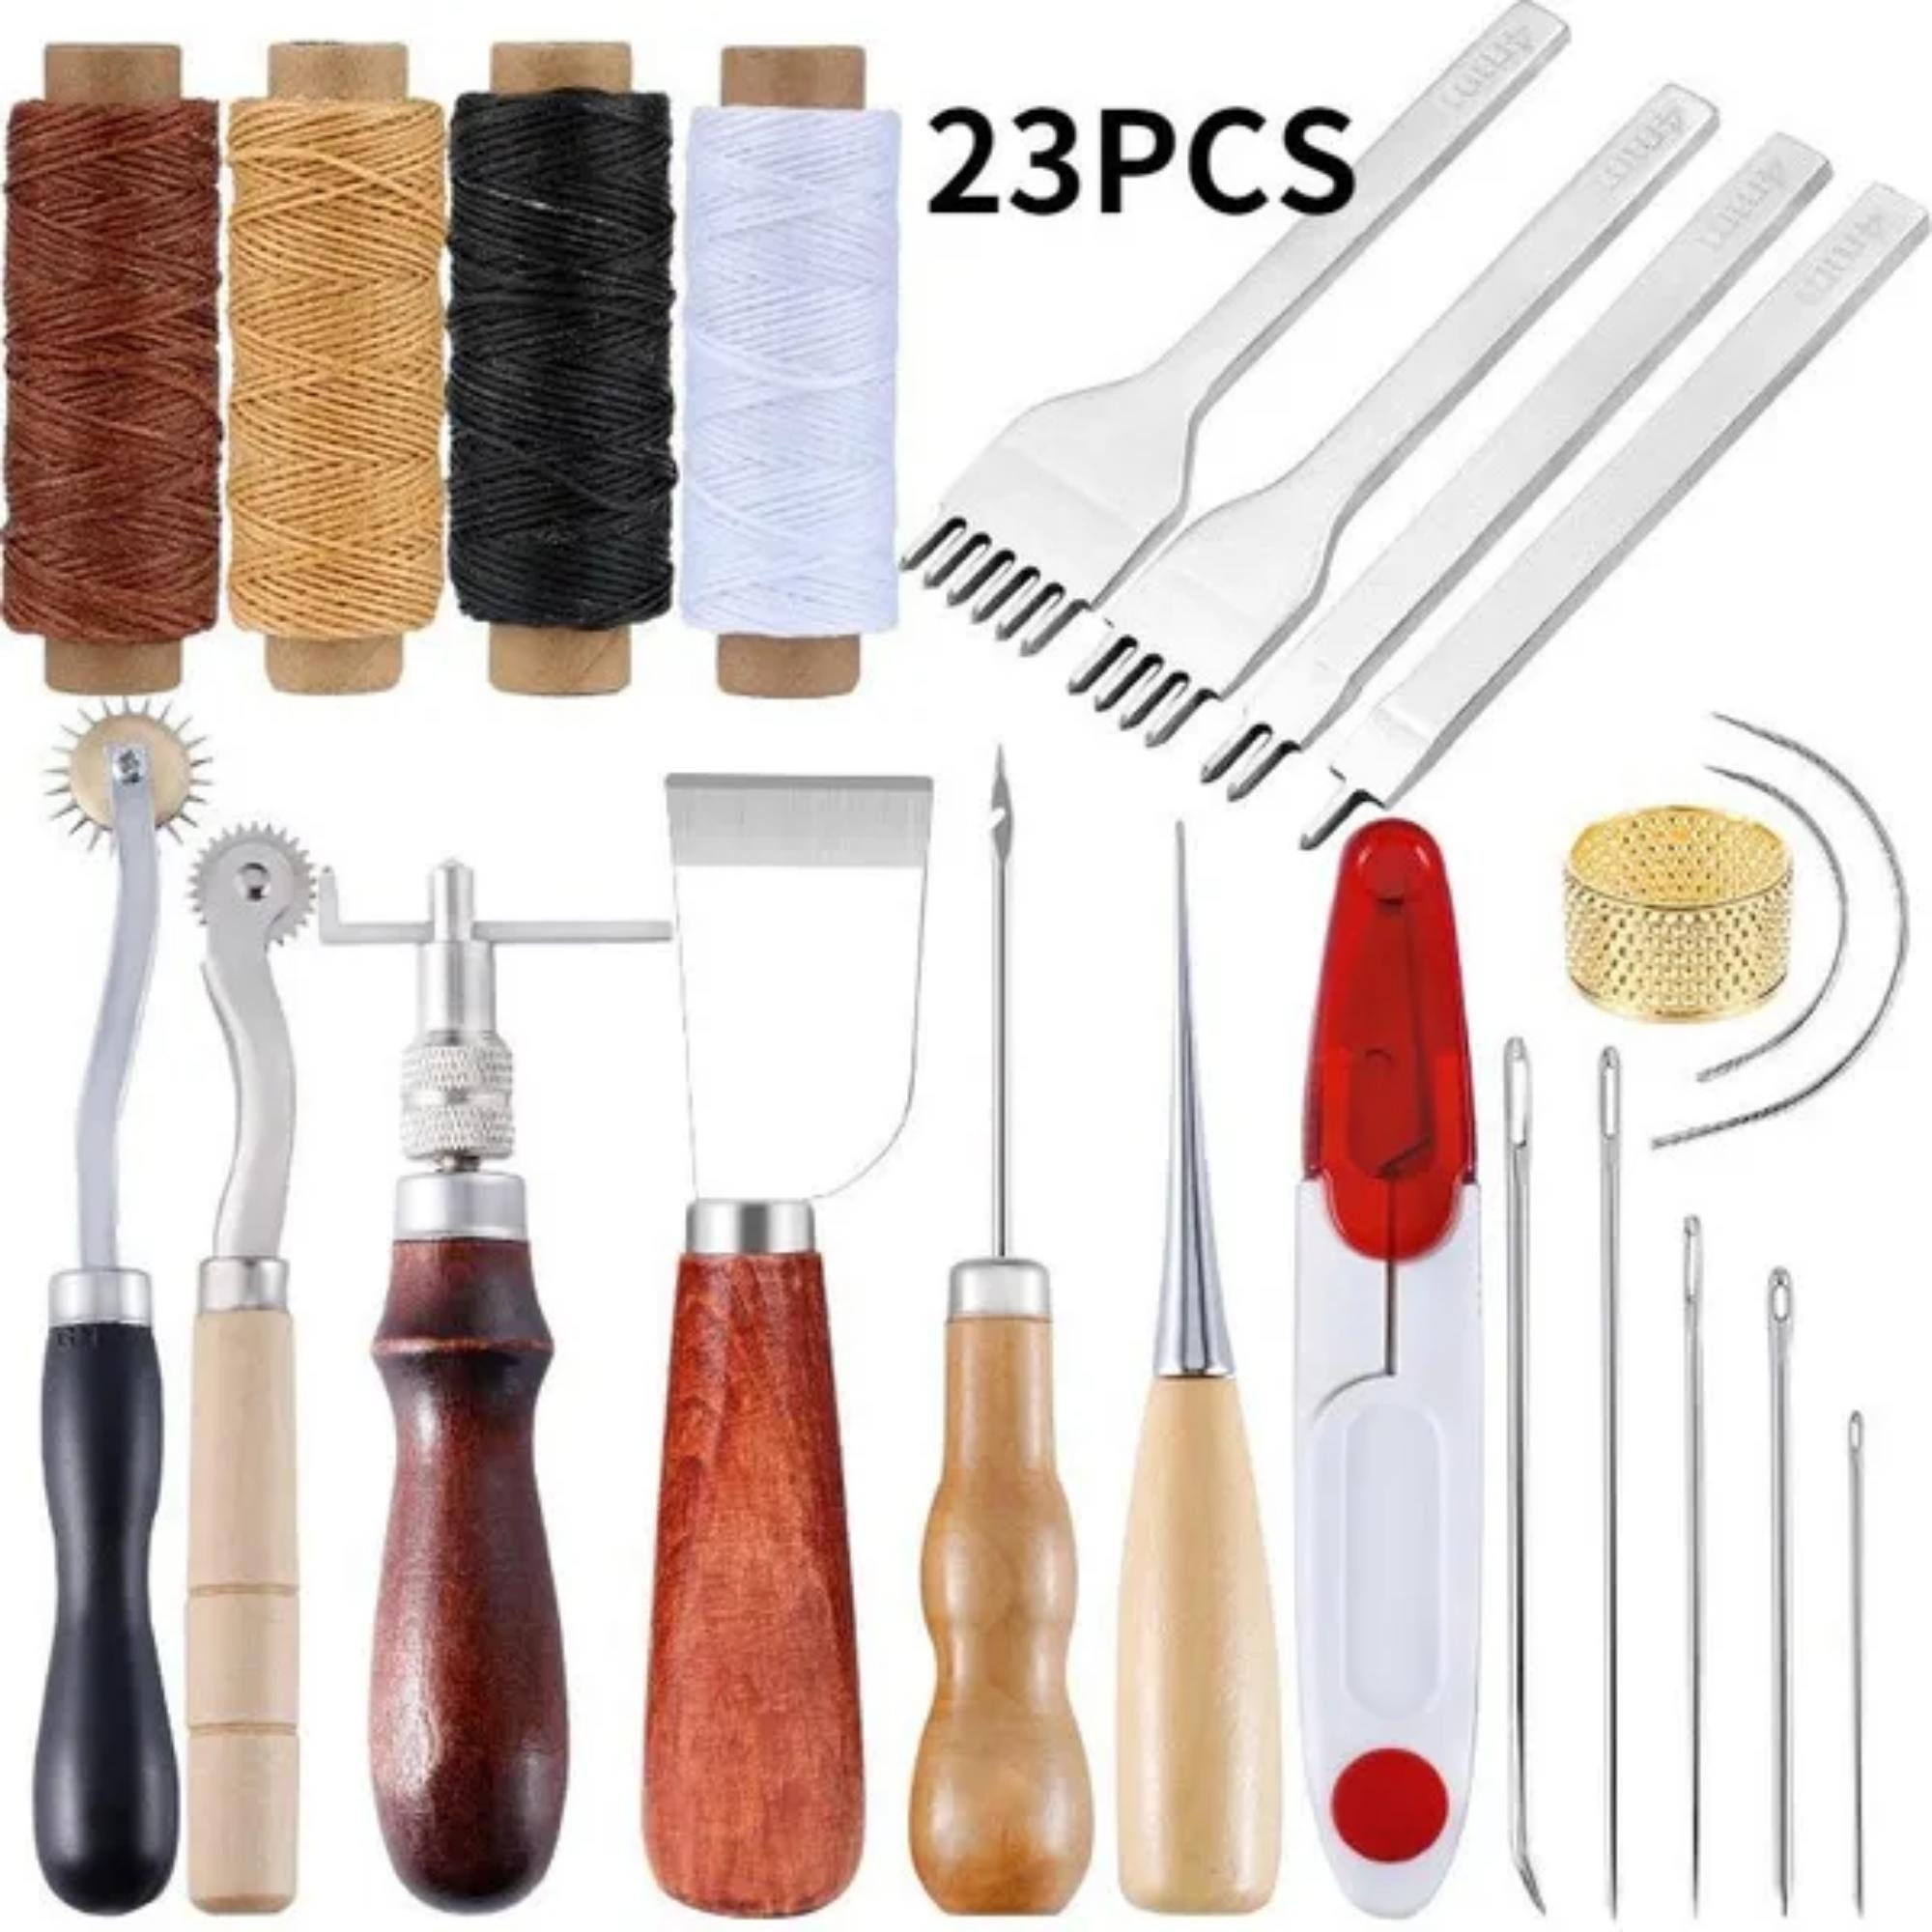 FEPITO 58 Pcs Leather Craft Tools Leather Working Tools Kit DIY